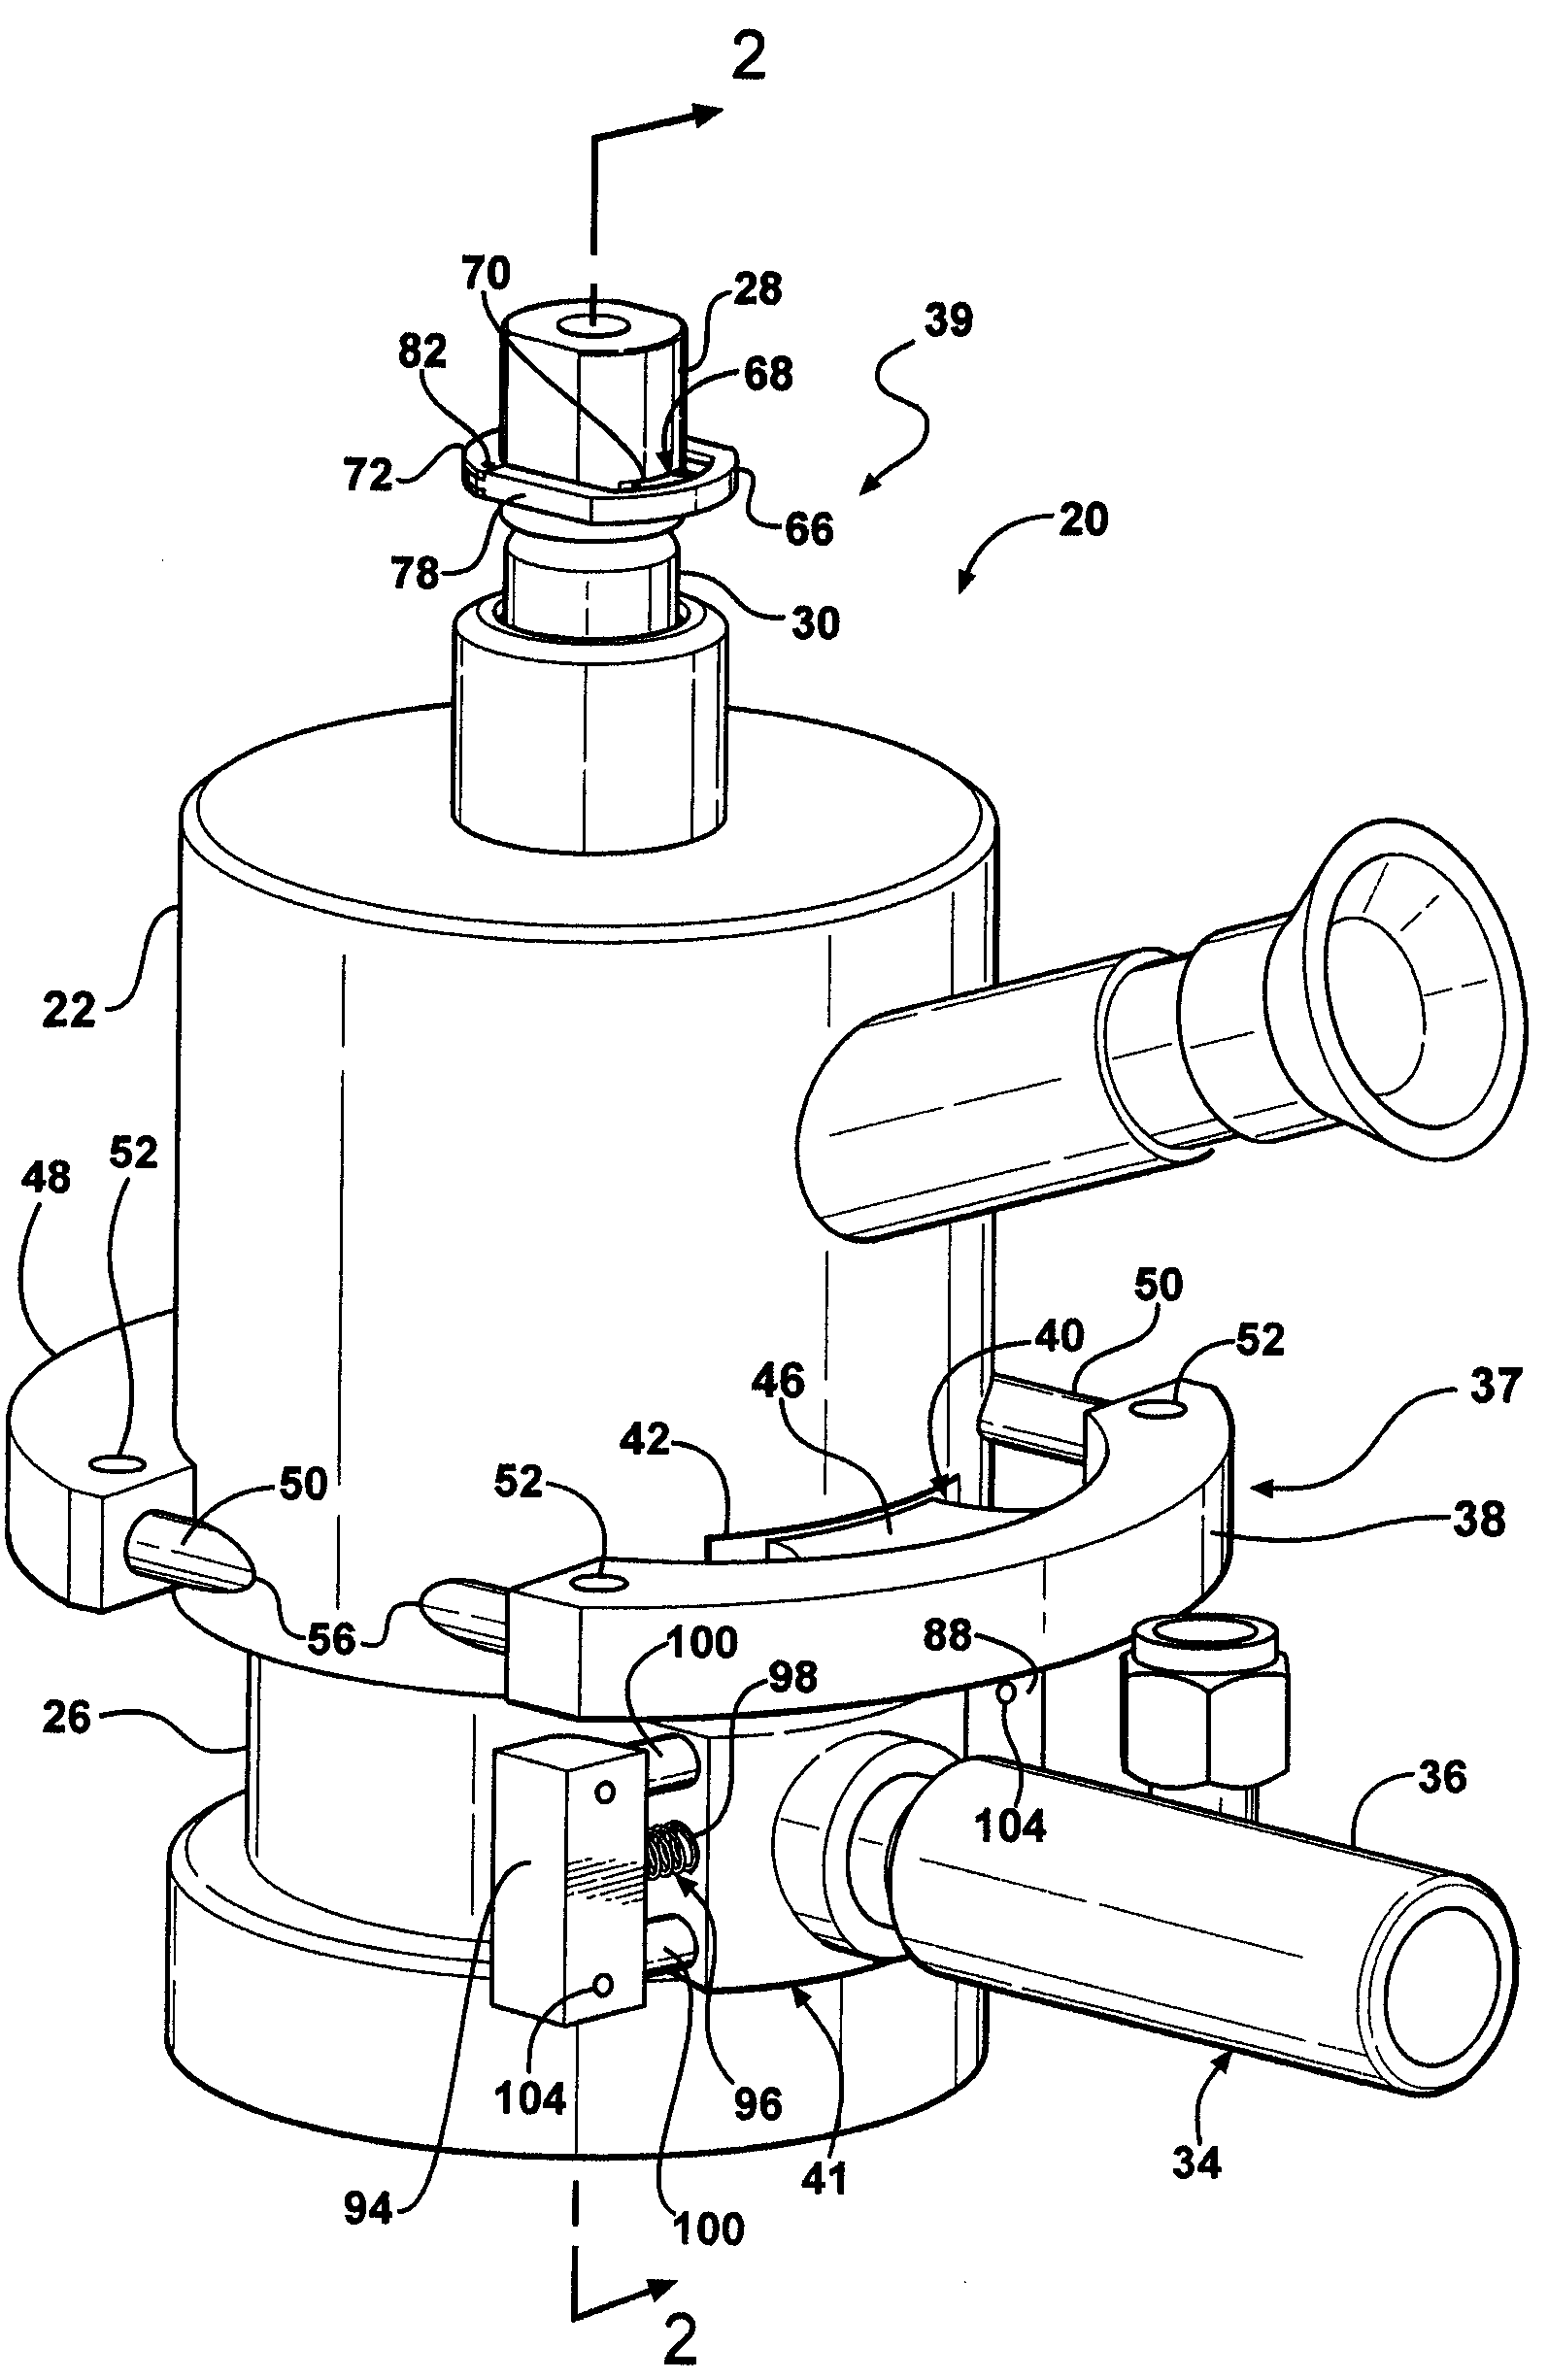 Filling valve apparatus for a beverage filling machine